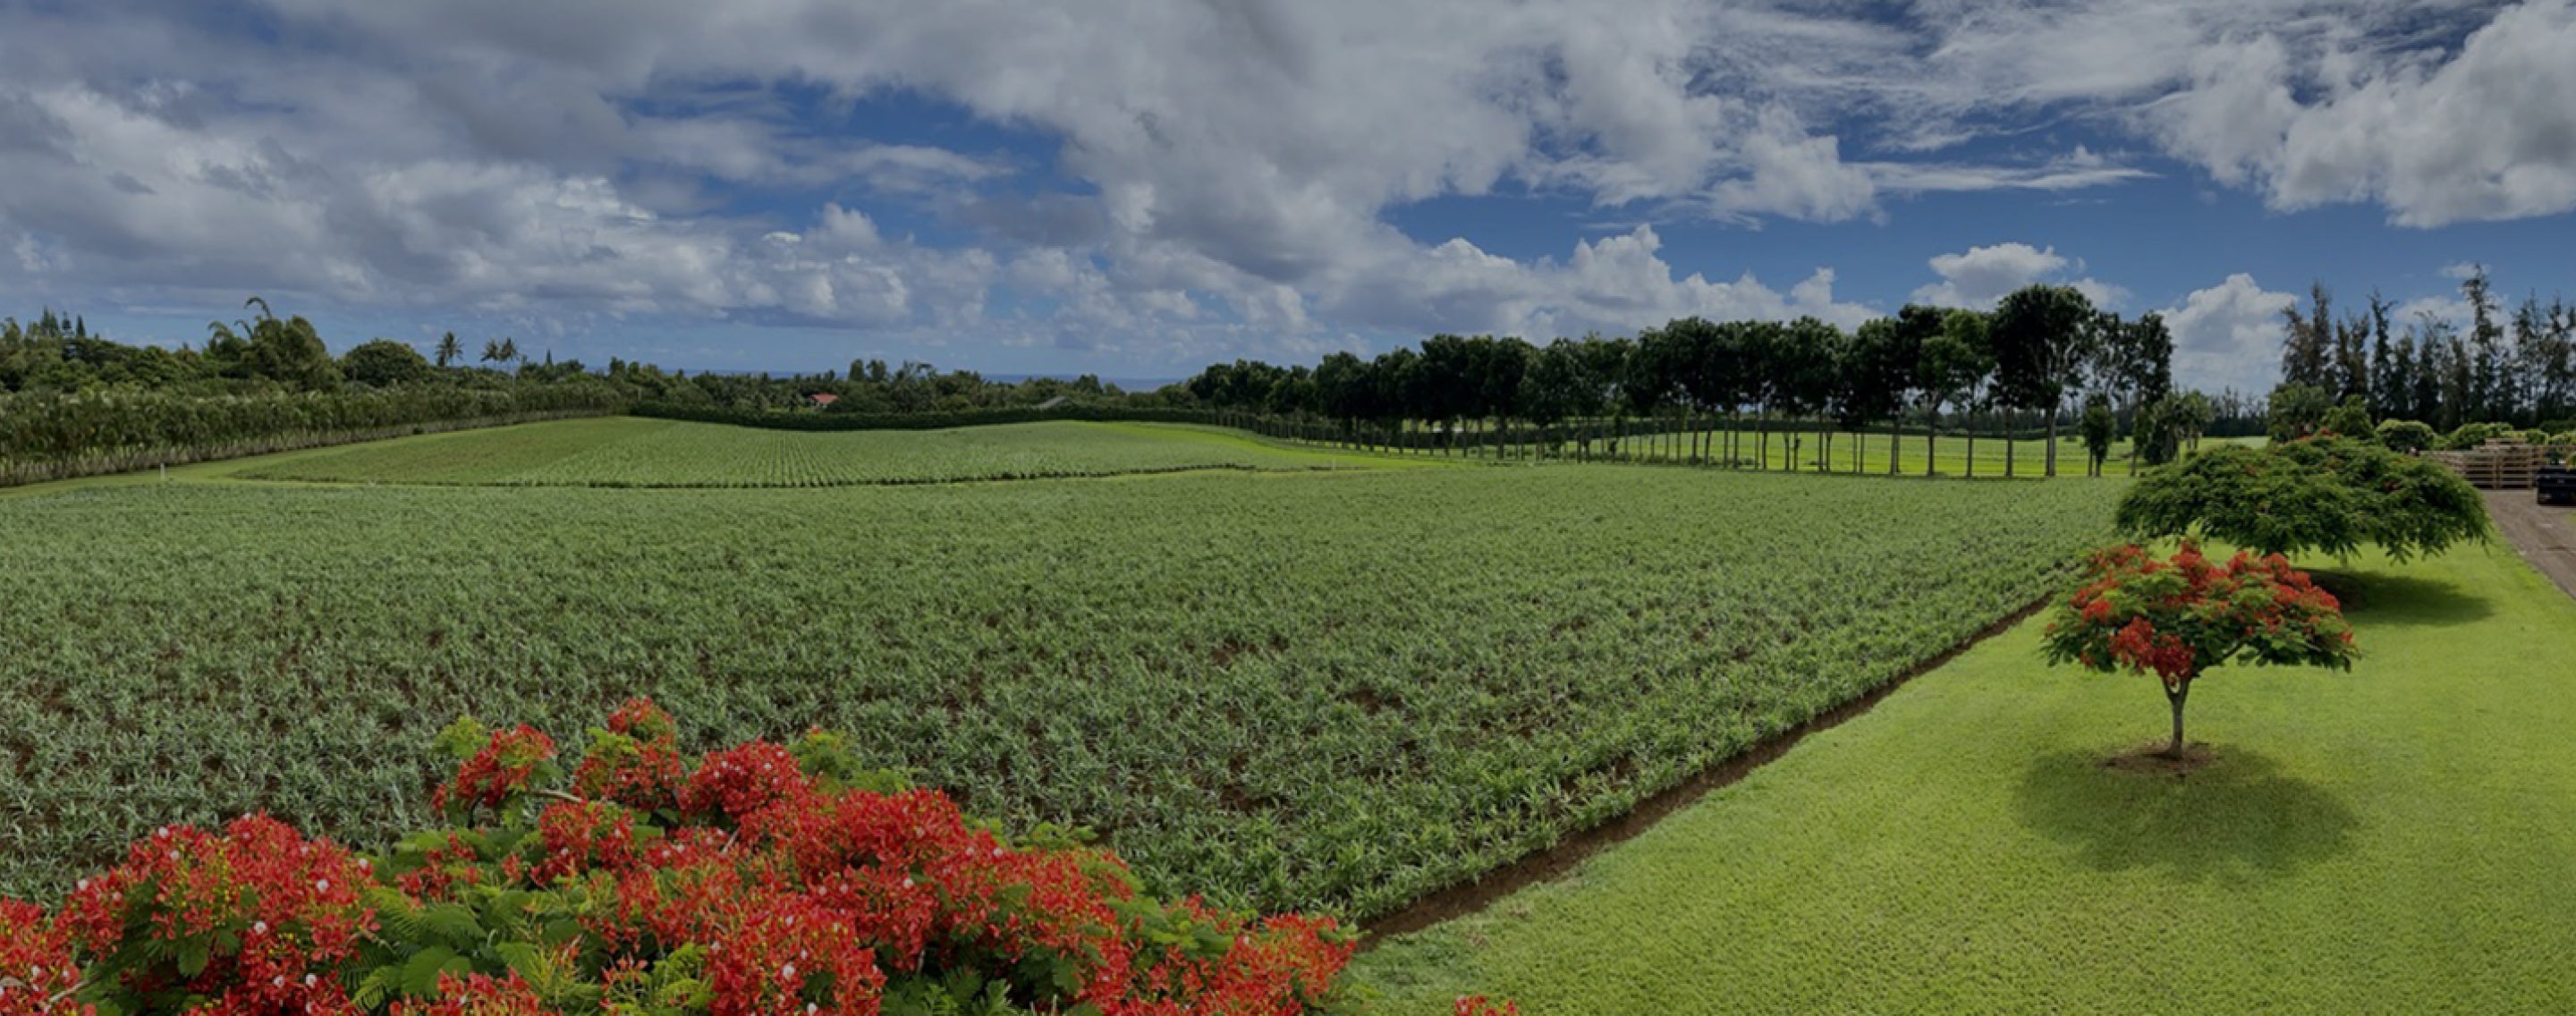 green field surrounded by trees on a farm in Hawaii